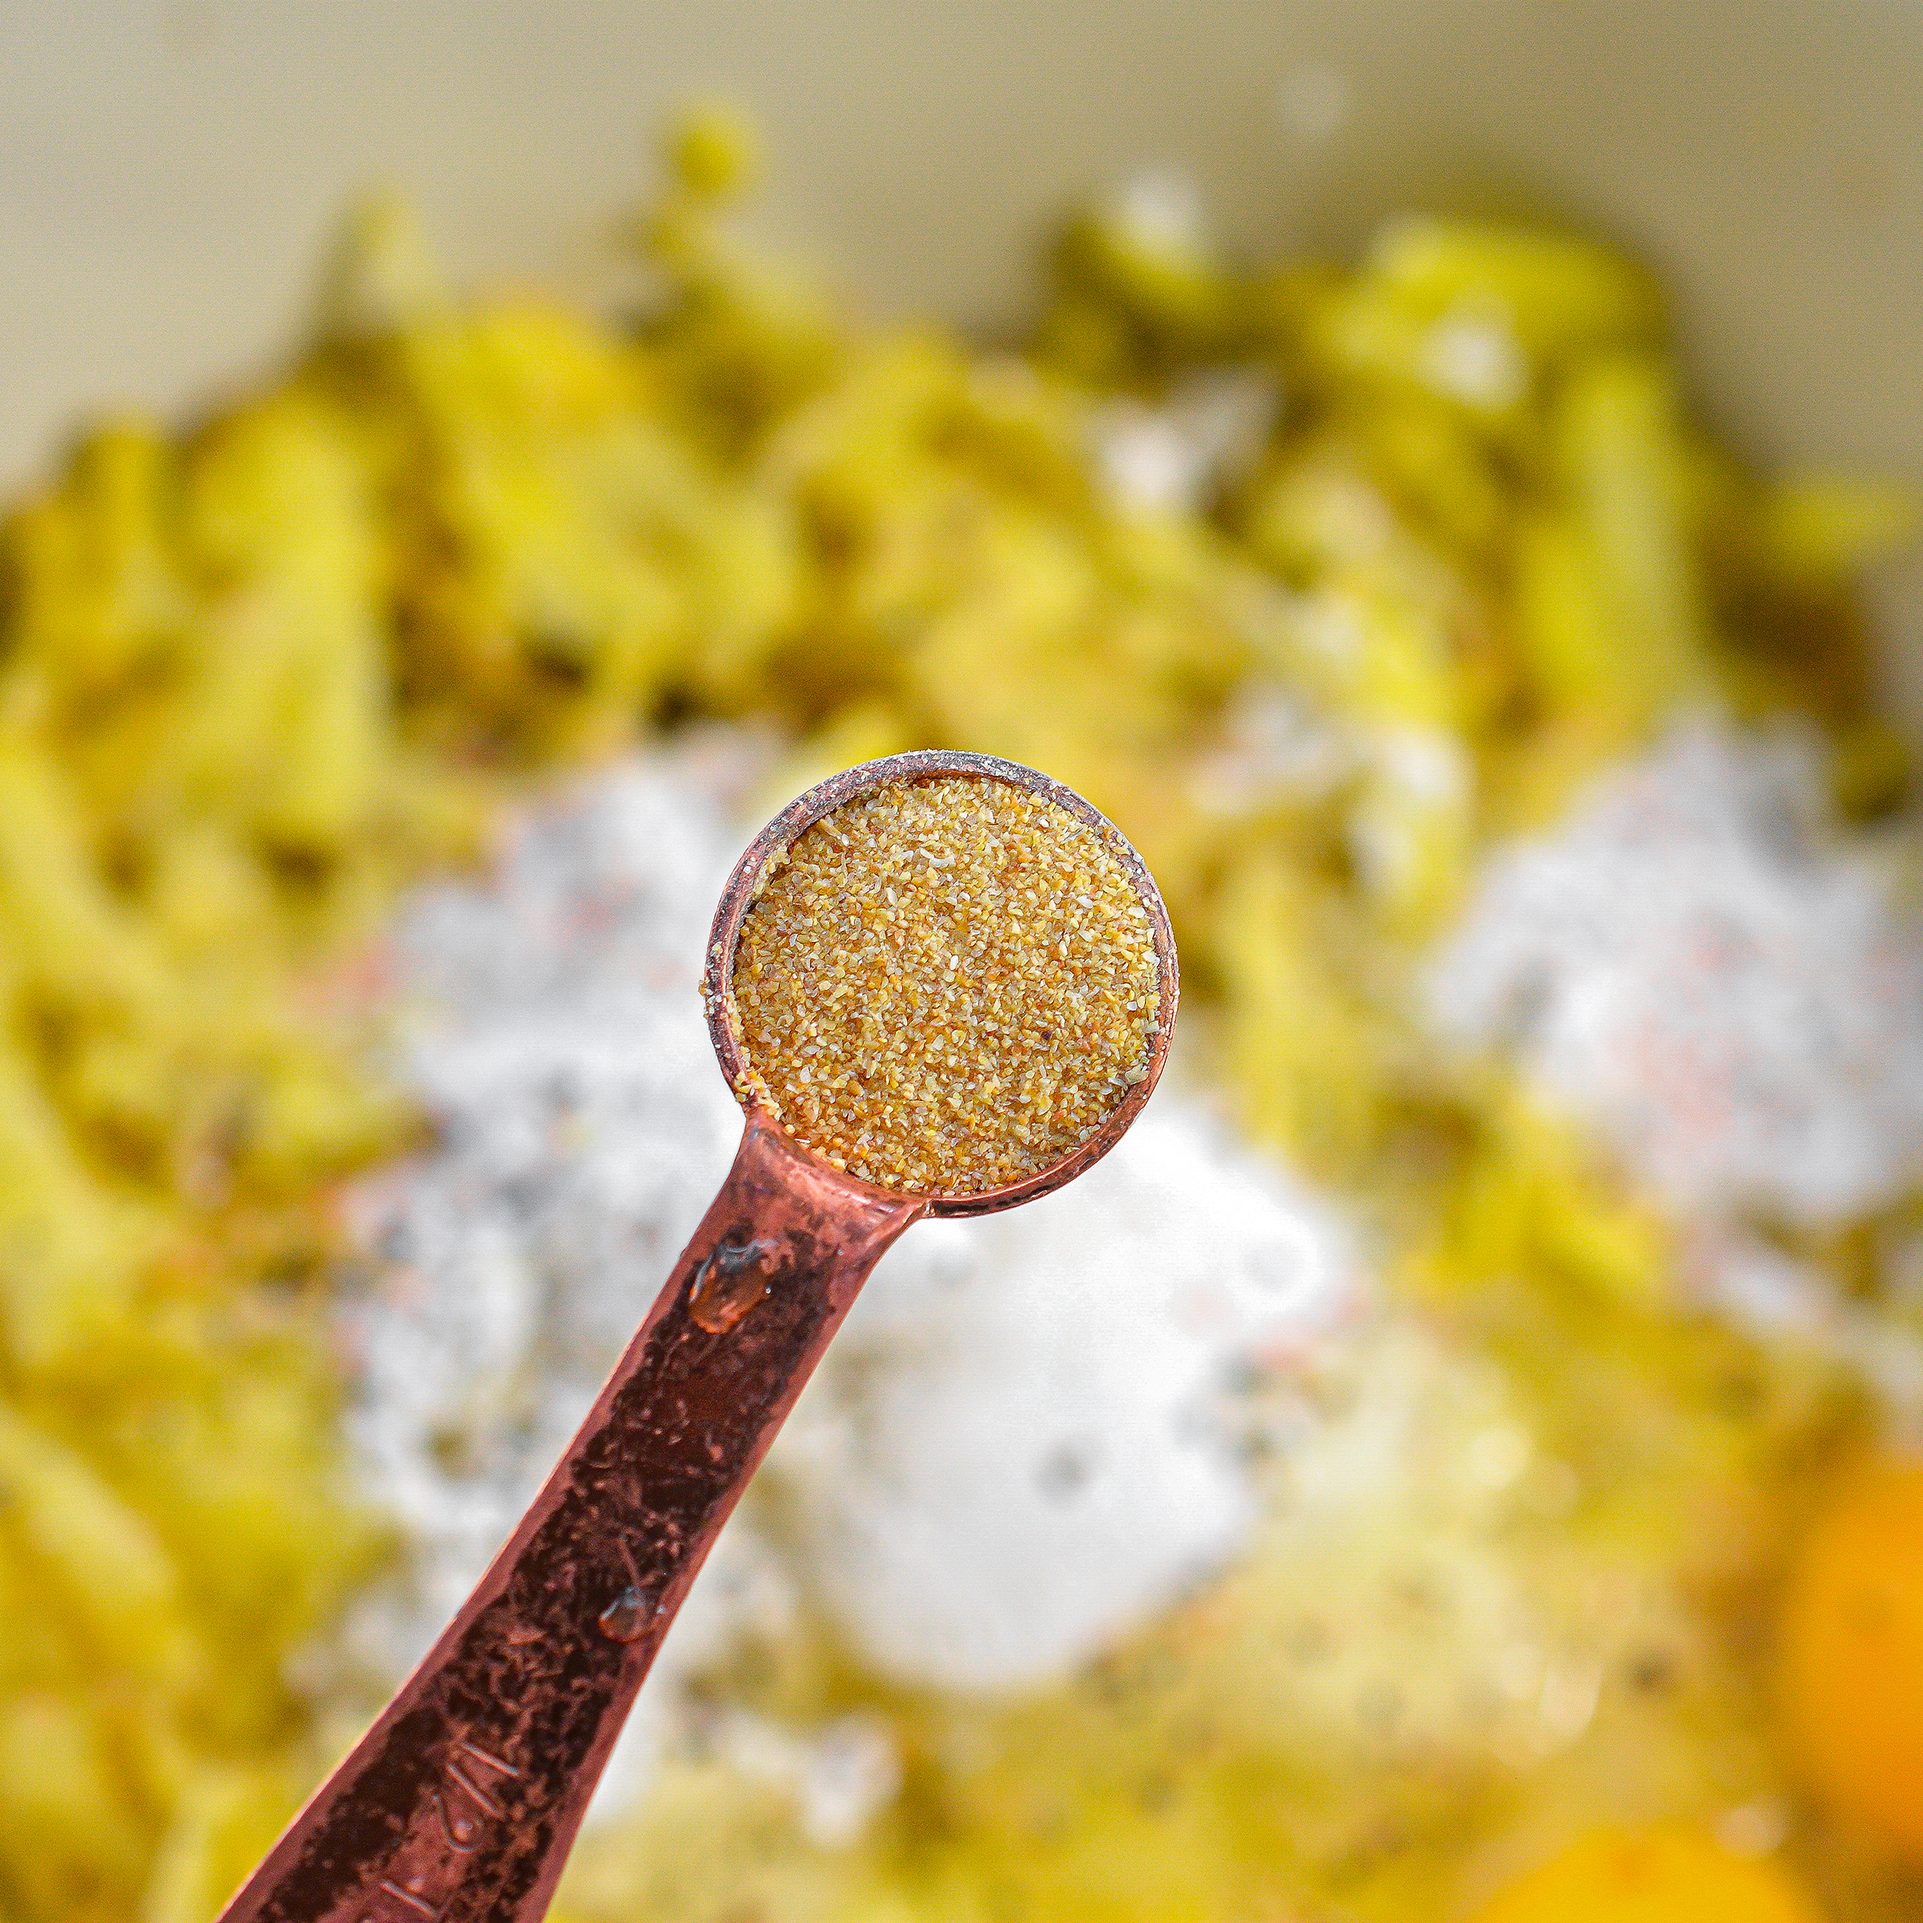 In a large mixing bowl, combine the shredded potato, 3 eggs, ½ cup flour, garlic powder, and salt and pepper to taste.